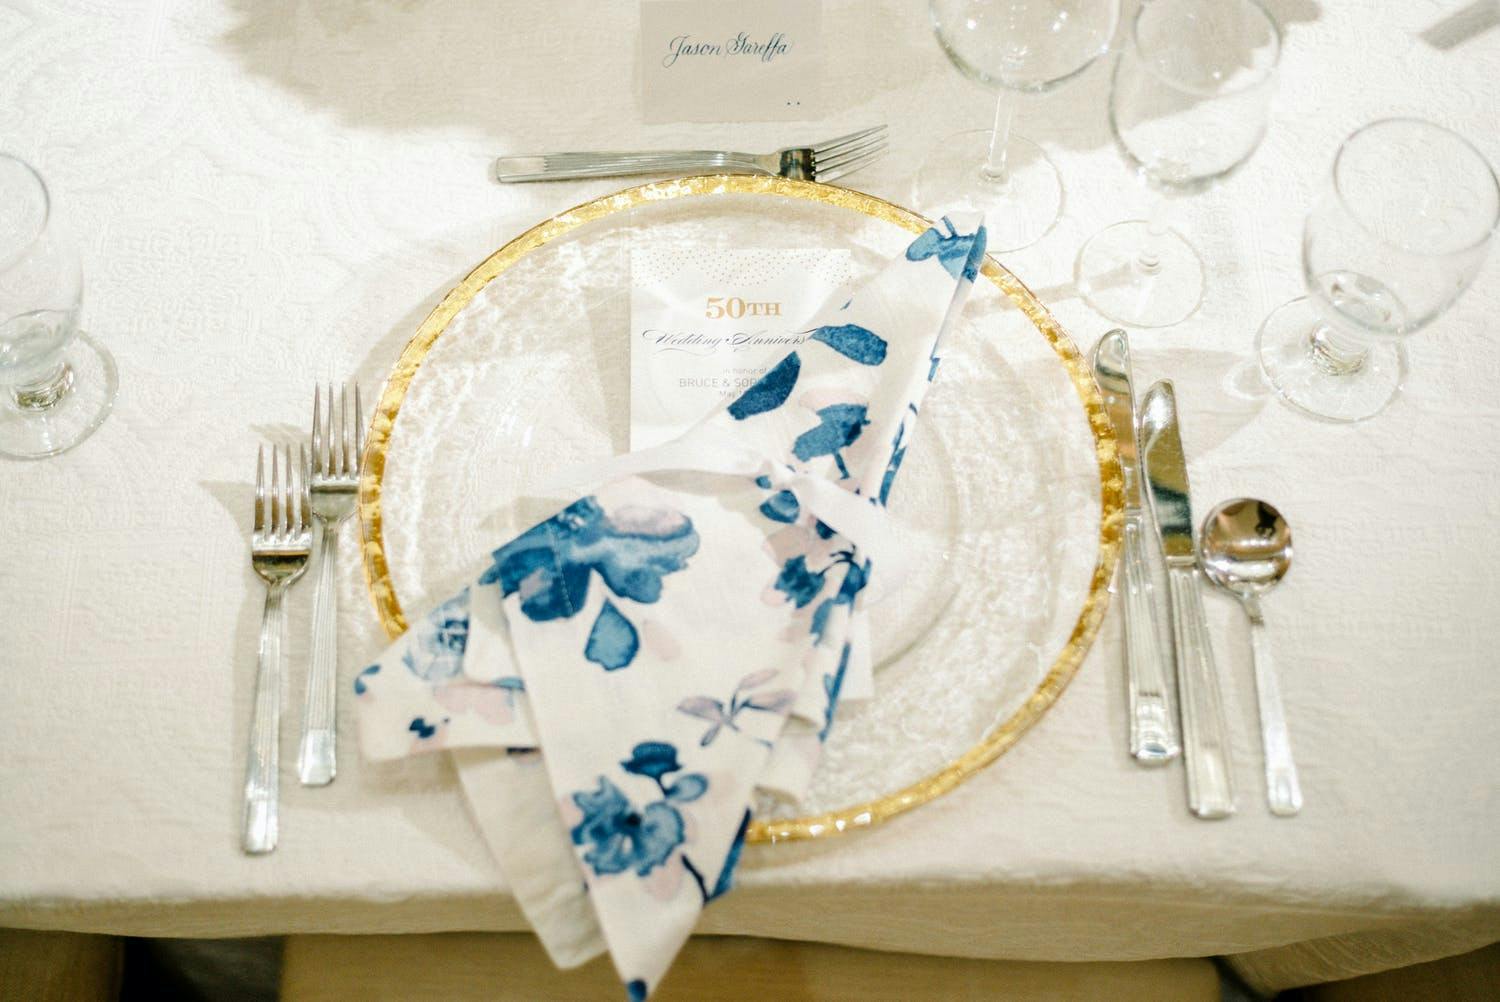 Elegant dinner plate with blue and white floral napkin at 50th-wedding anniversary | PartySlate